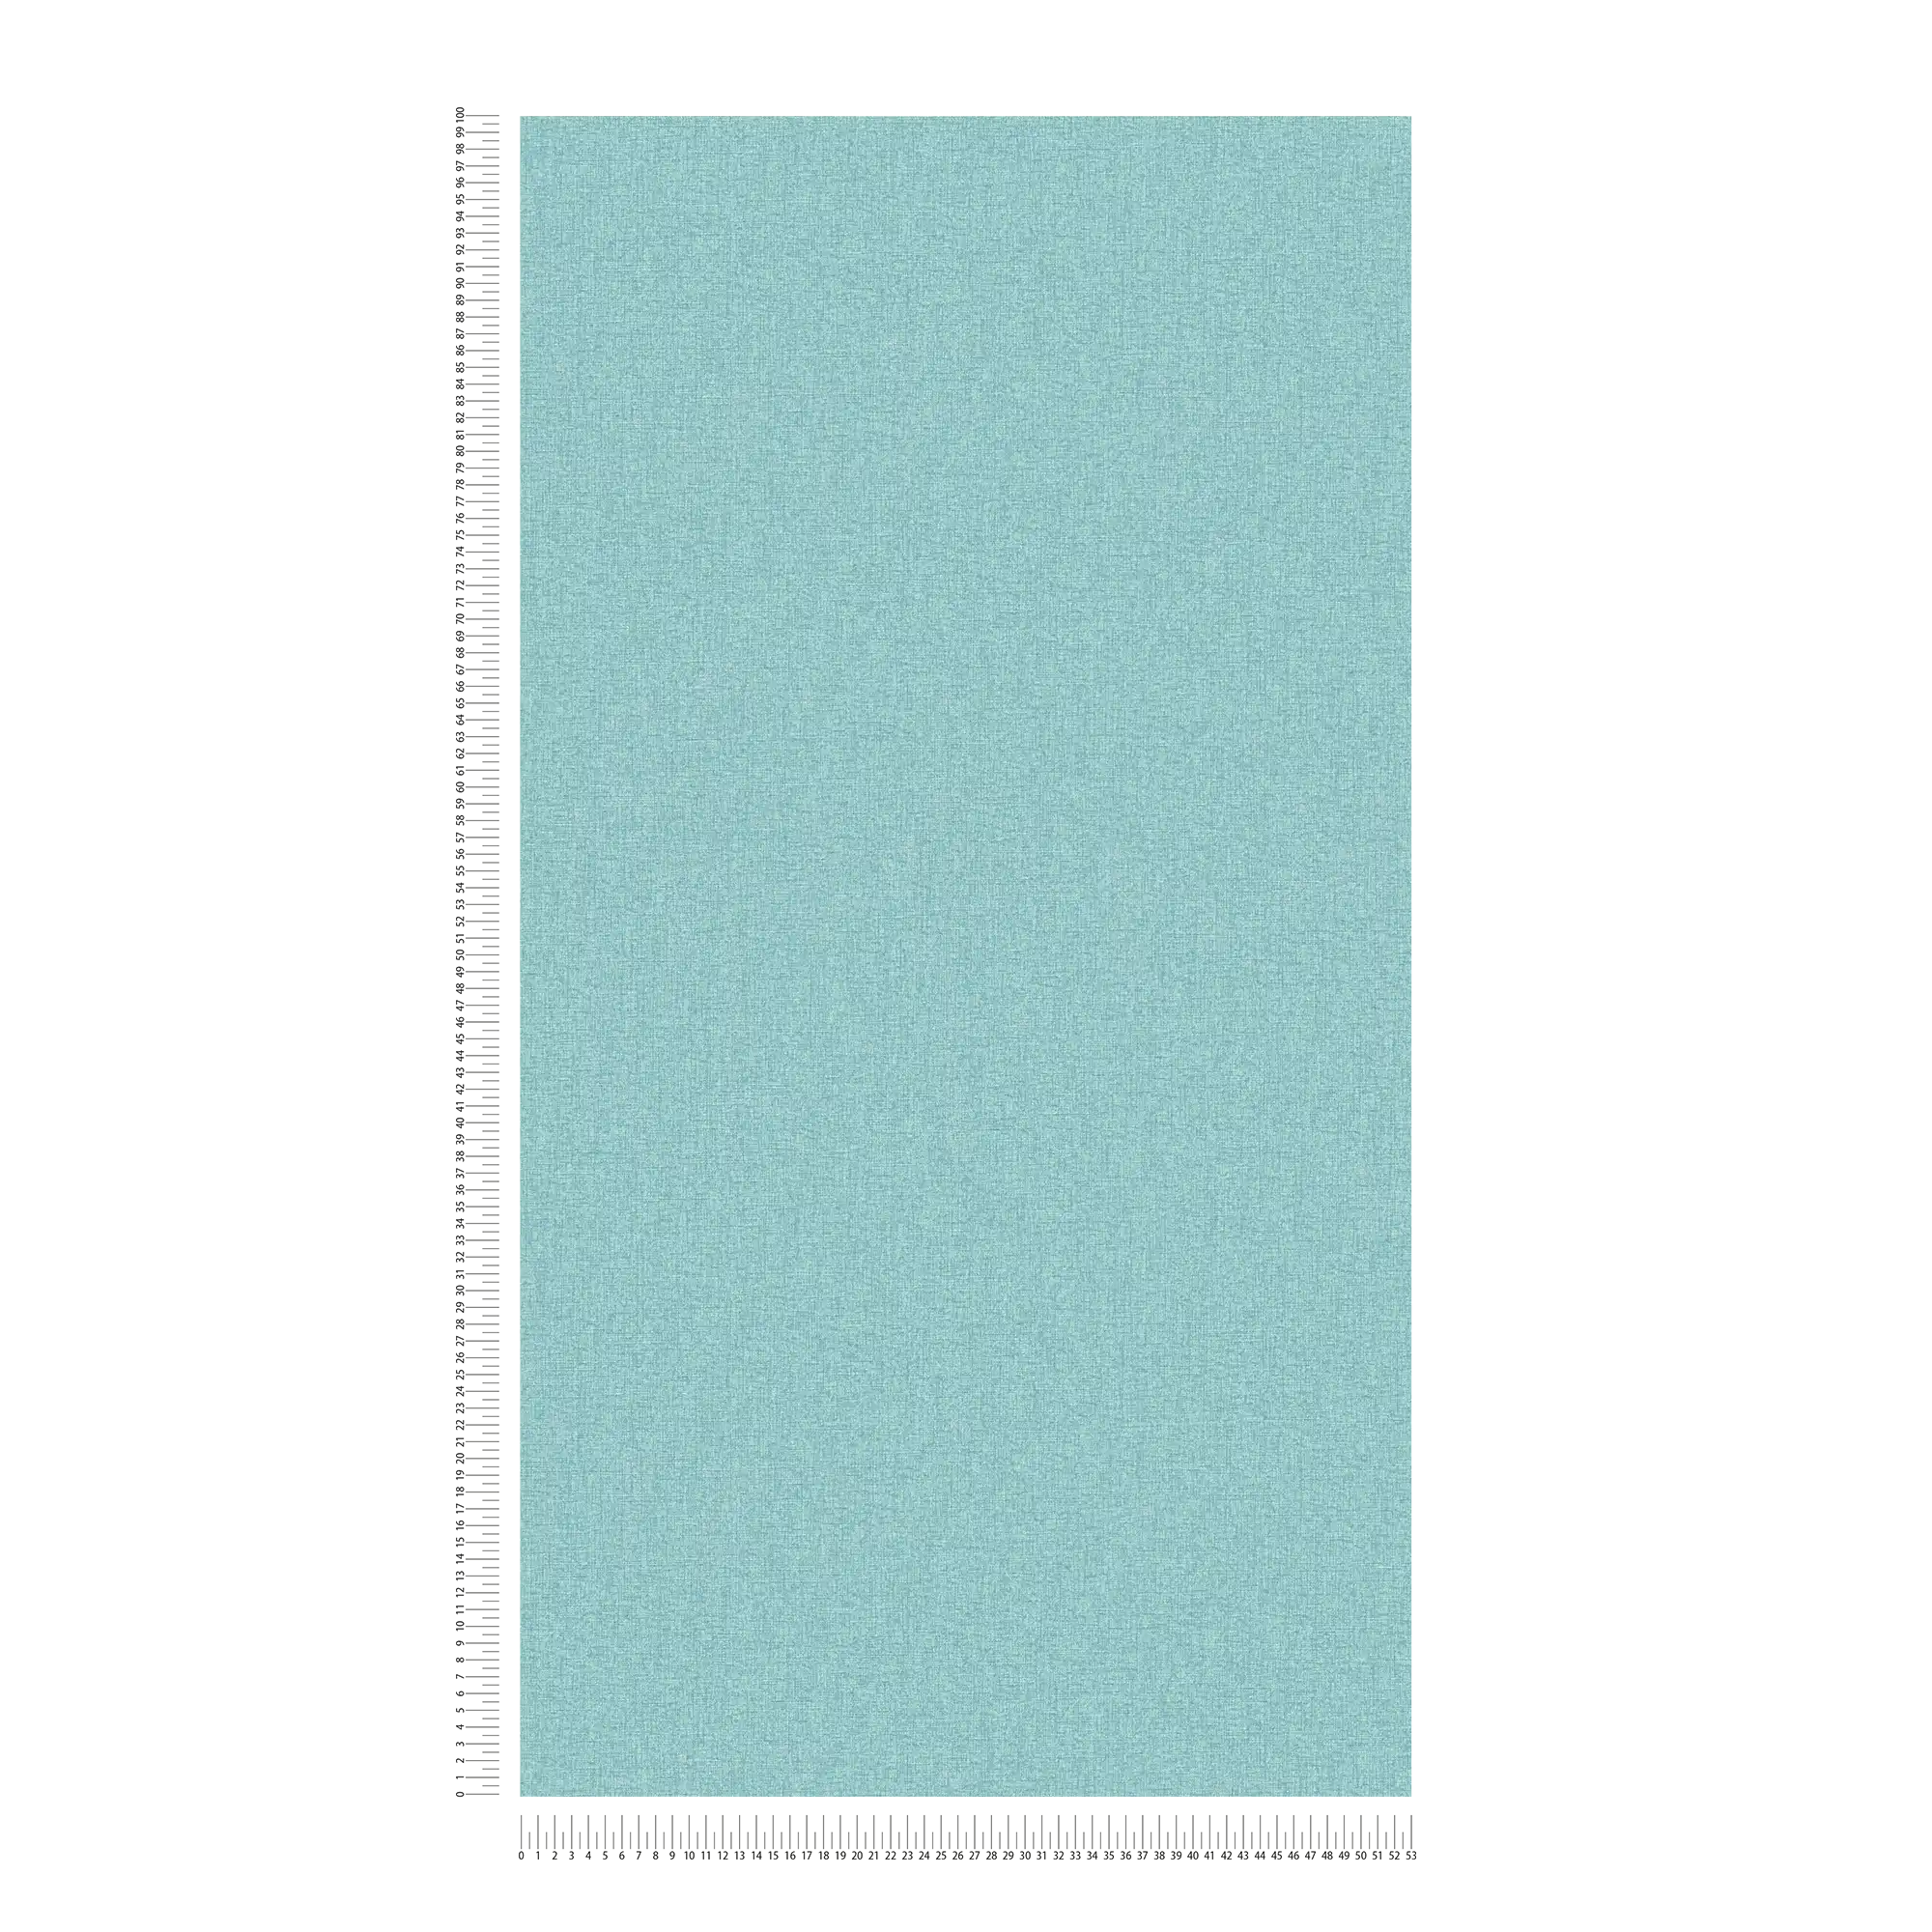             Plain non-woven wallpaper in fabric look with light structure, matt - turquoise, blue, light blue
        